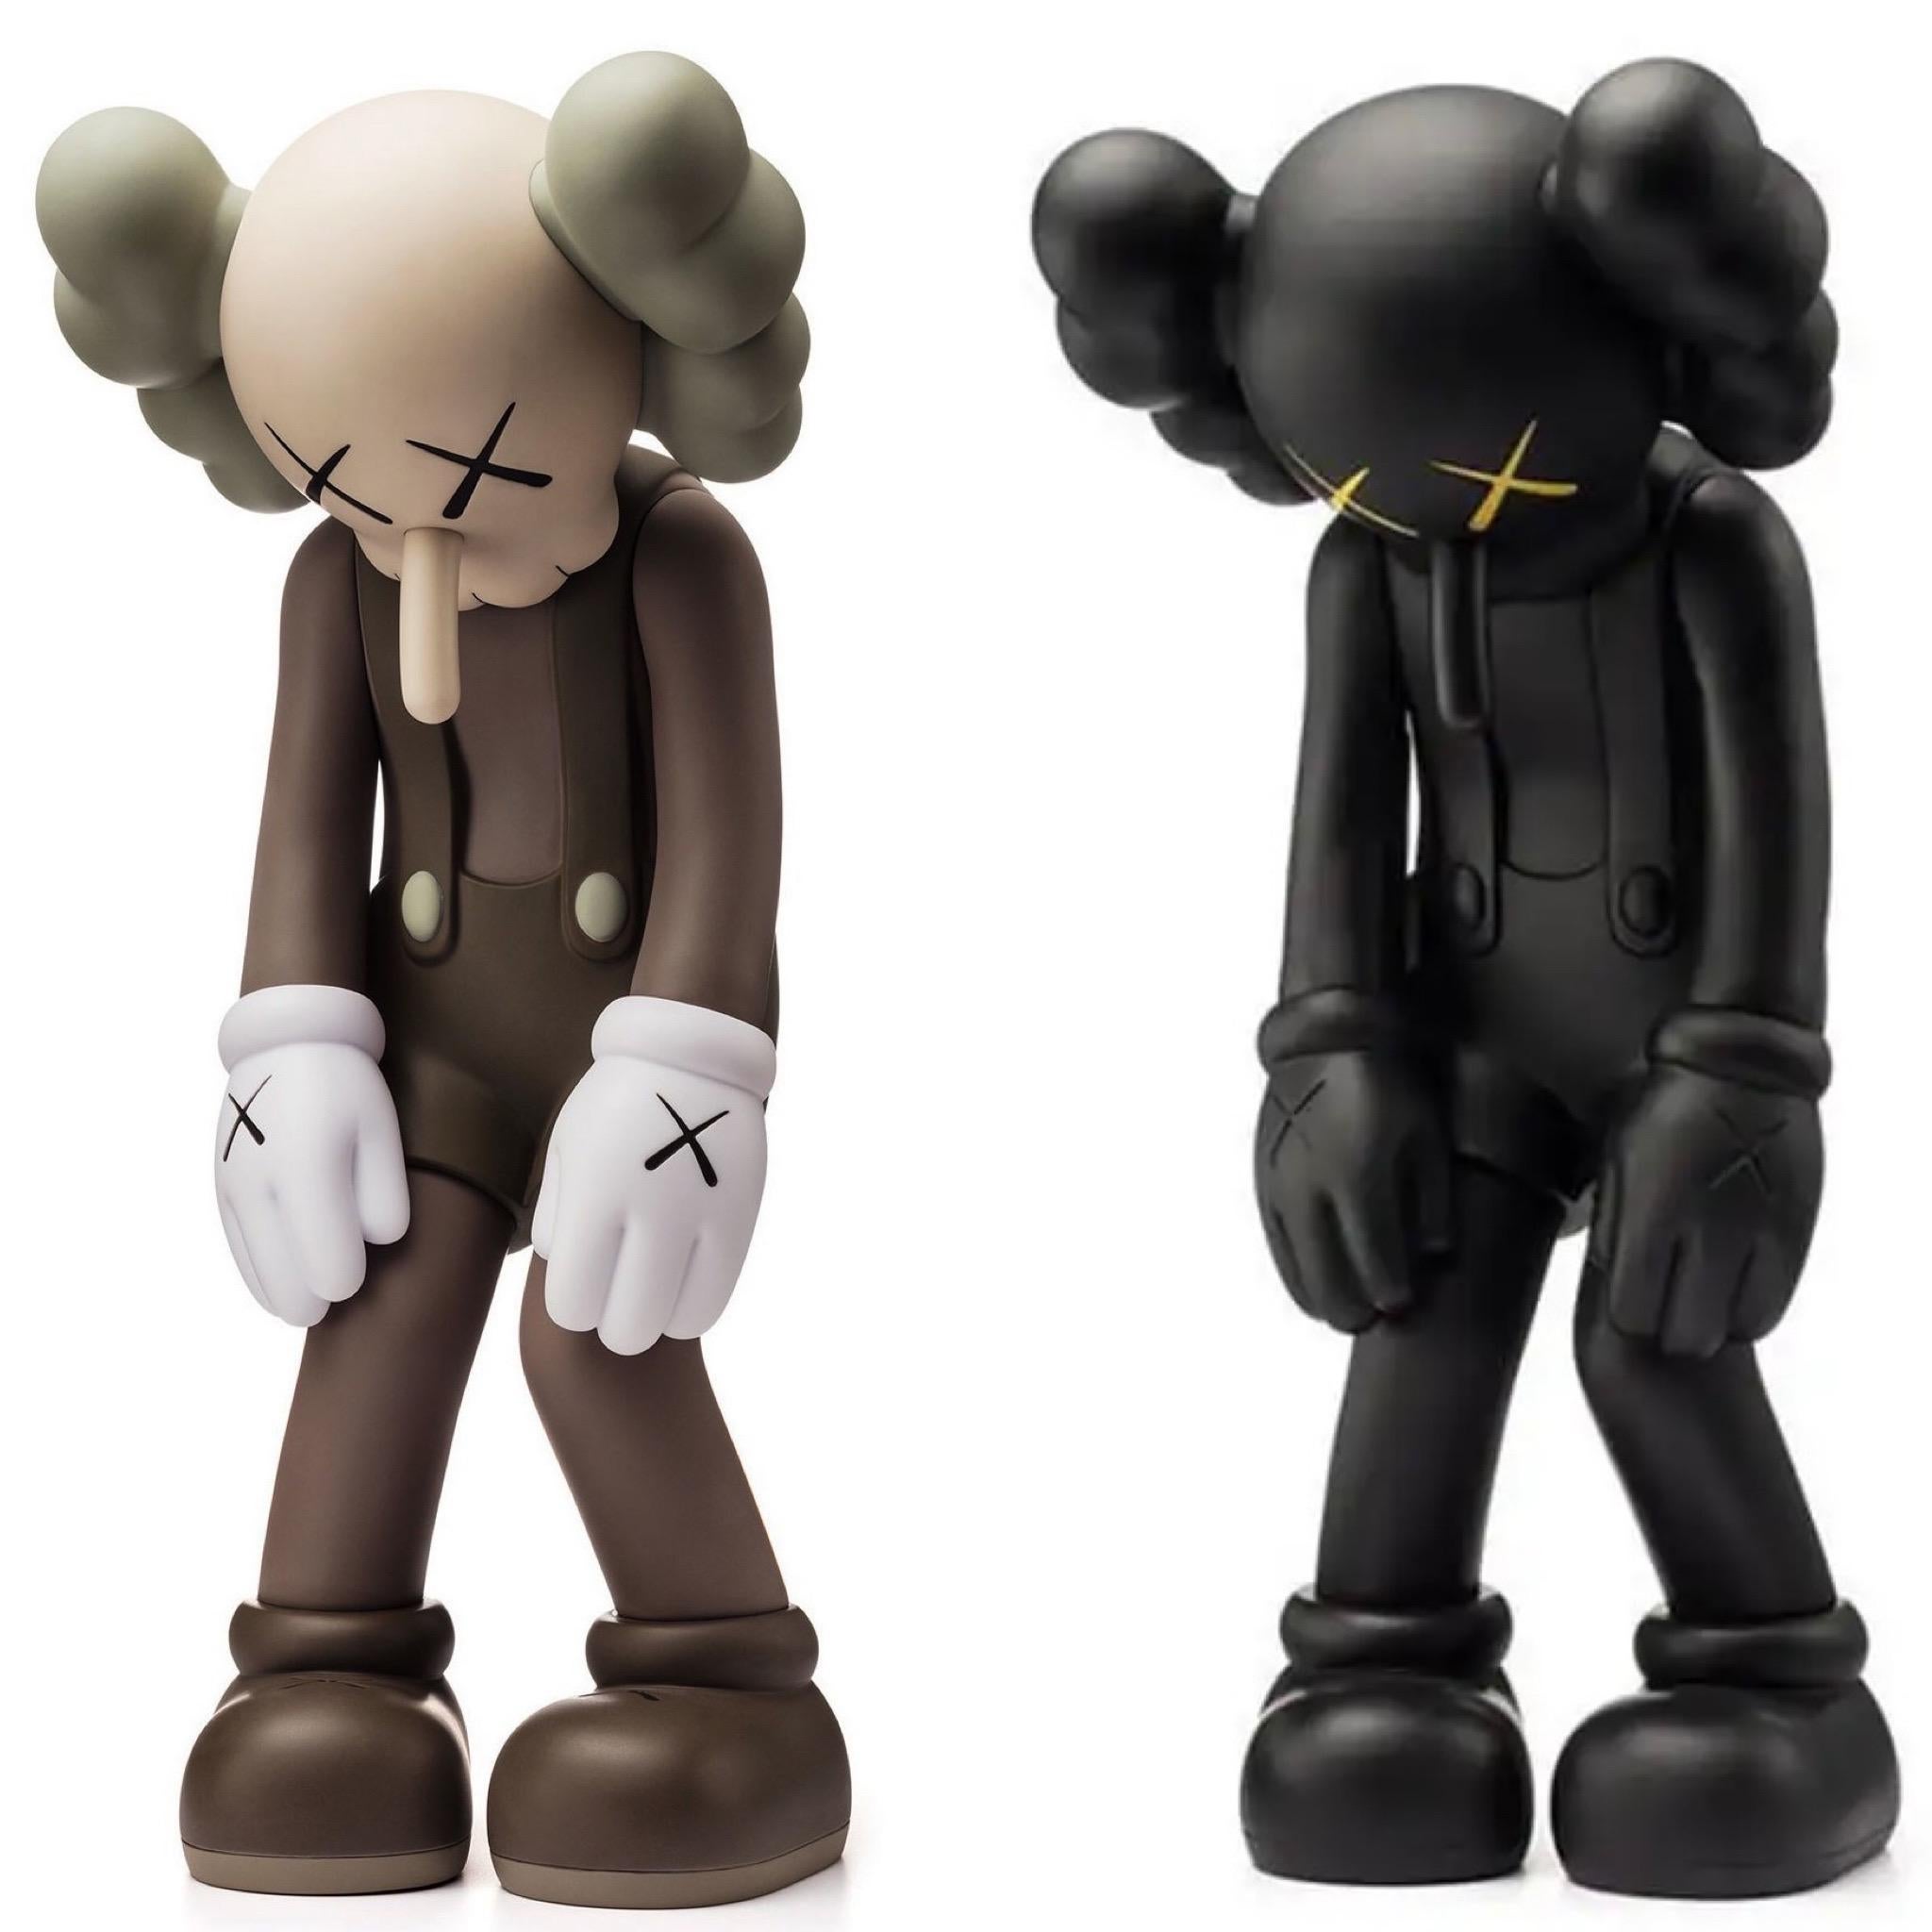 KAWS, Medicom Toy Chum White Available For Immediate Sale At Sotheby's